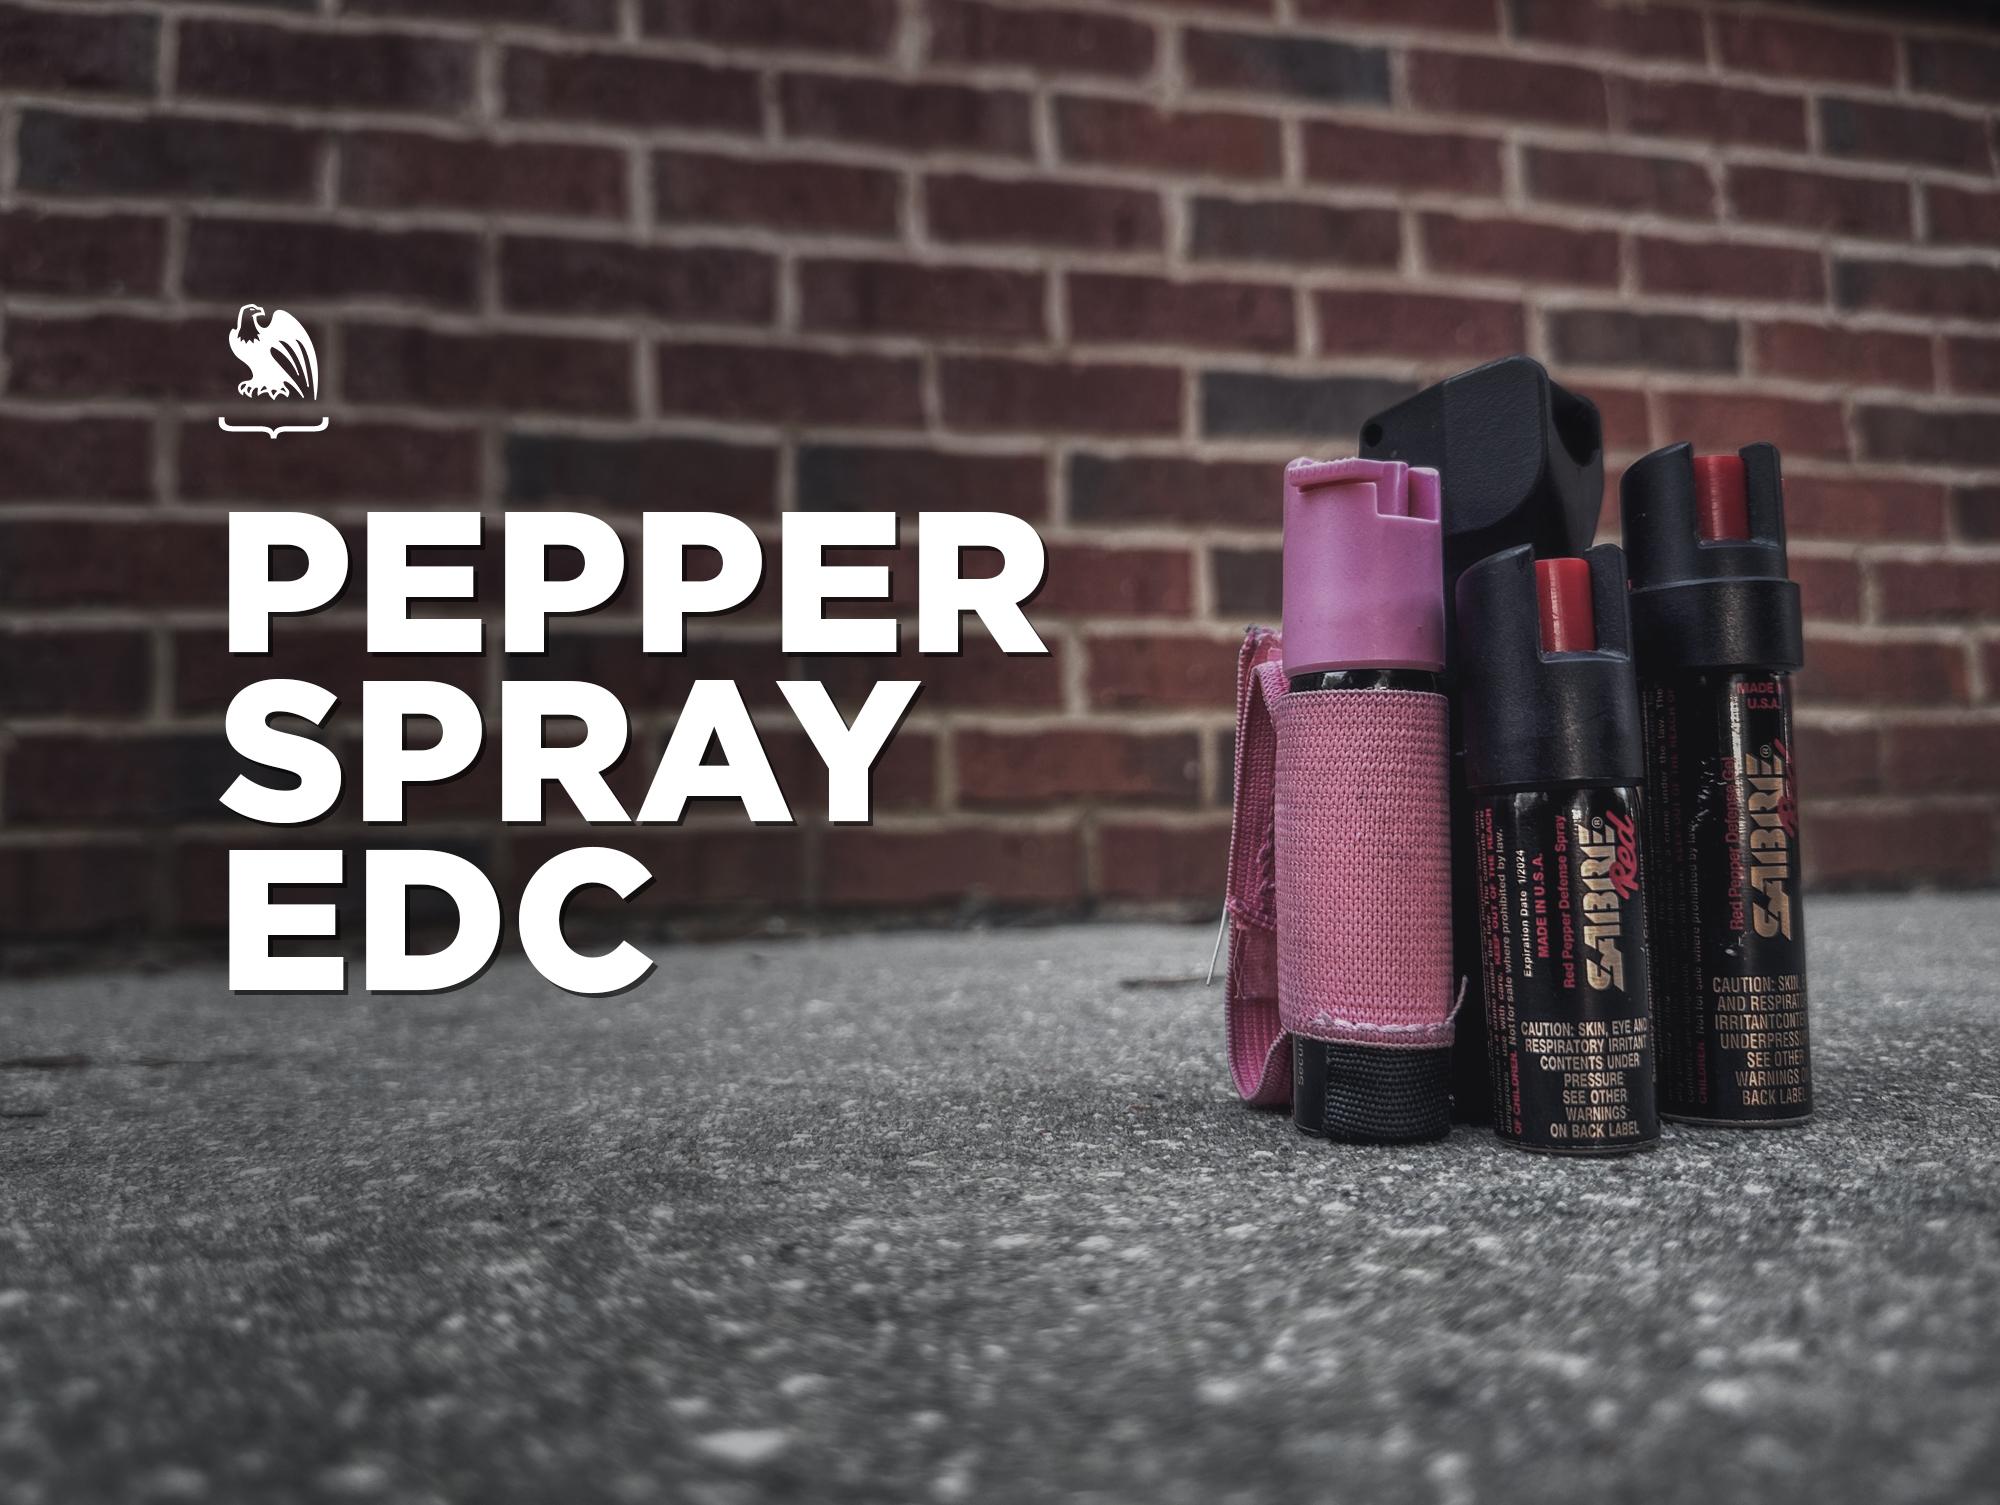 Different Pepper Spray Sizes Explained - SABRE